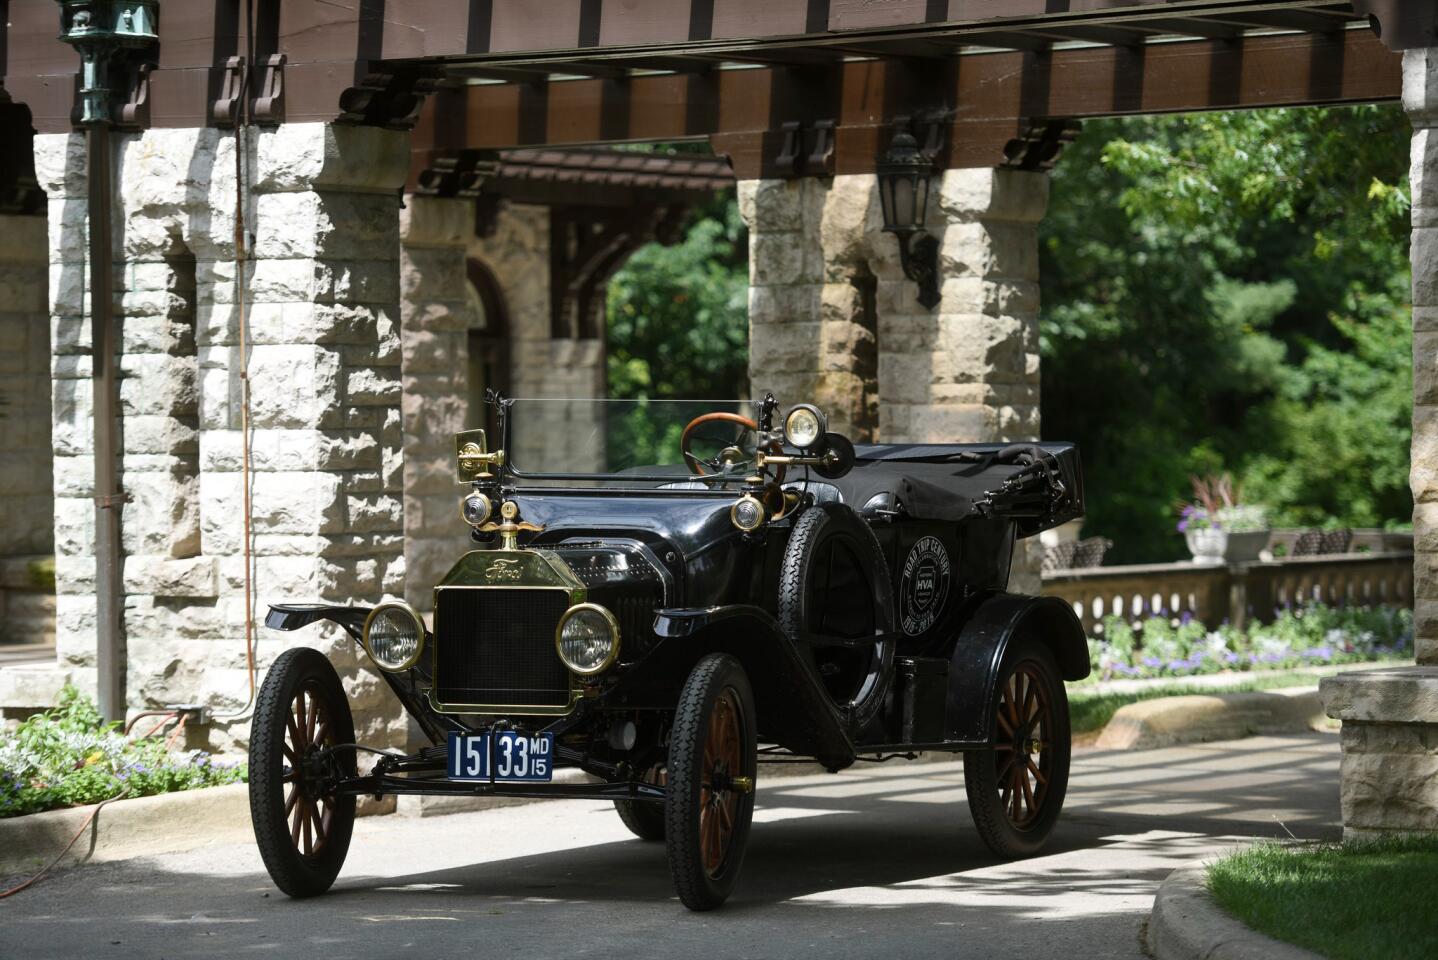 The Model T Touring Car, as it's officially known, is being used to re-create a 1915 journey that Edsel Ford took from Detroit to San Francisco. The road trip began Friday.